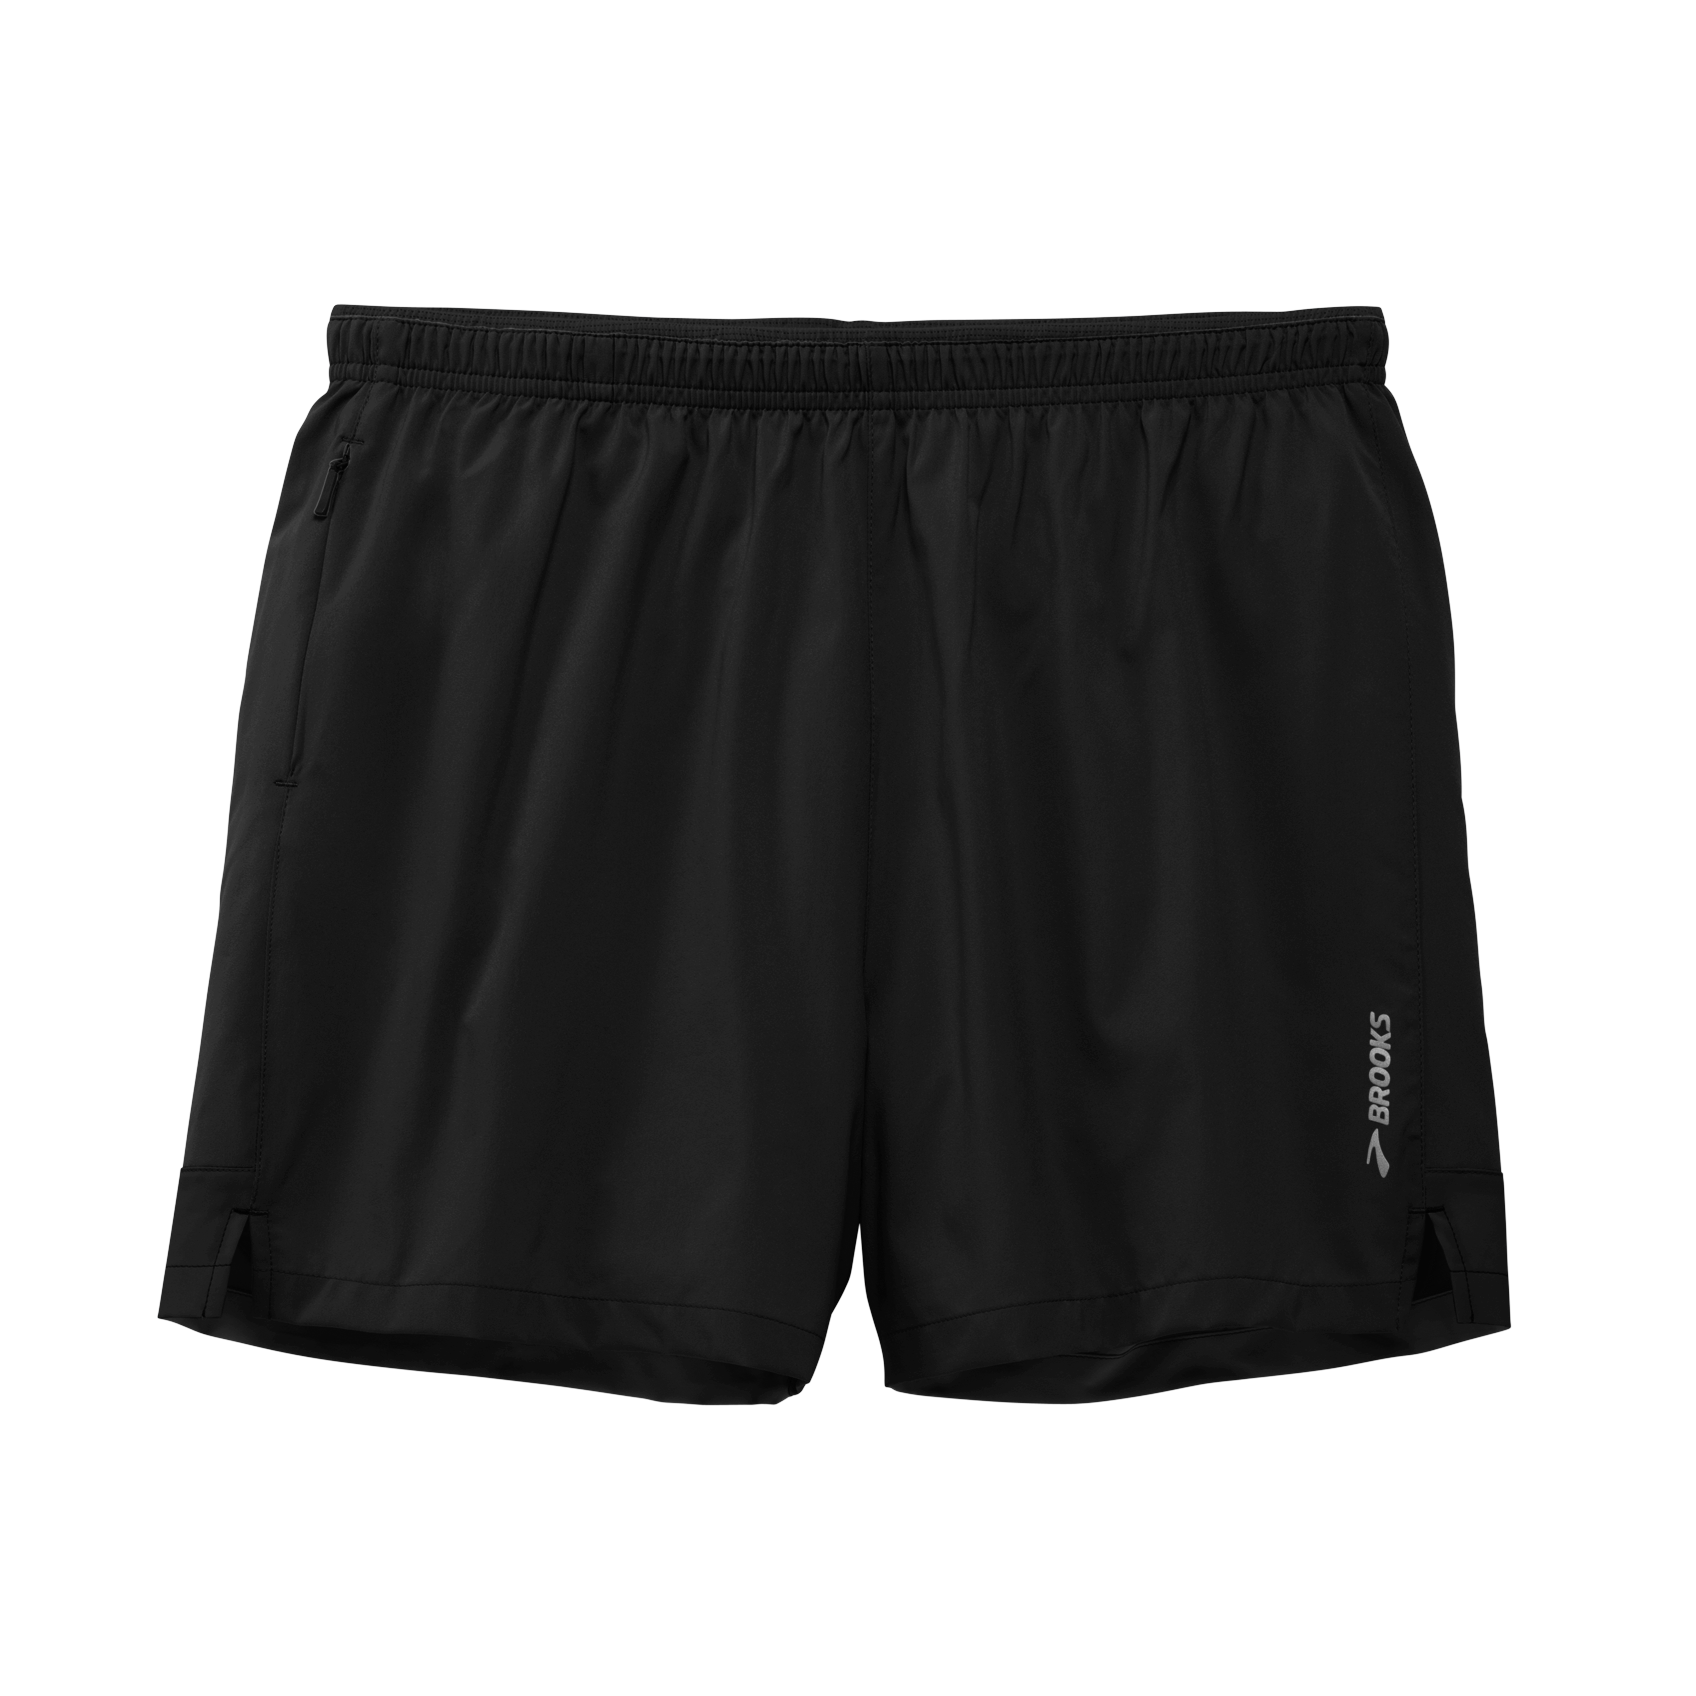 VAYAGER Mens Athletic Shorts 9 Inch Running Workout Short Quick Dry Mesh Liner with Zipper Pockets 